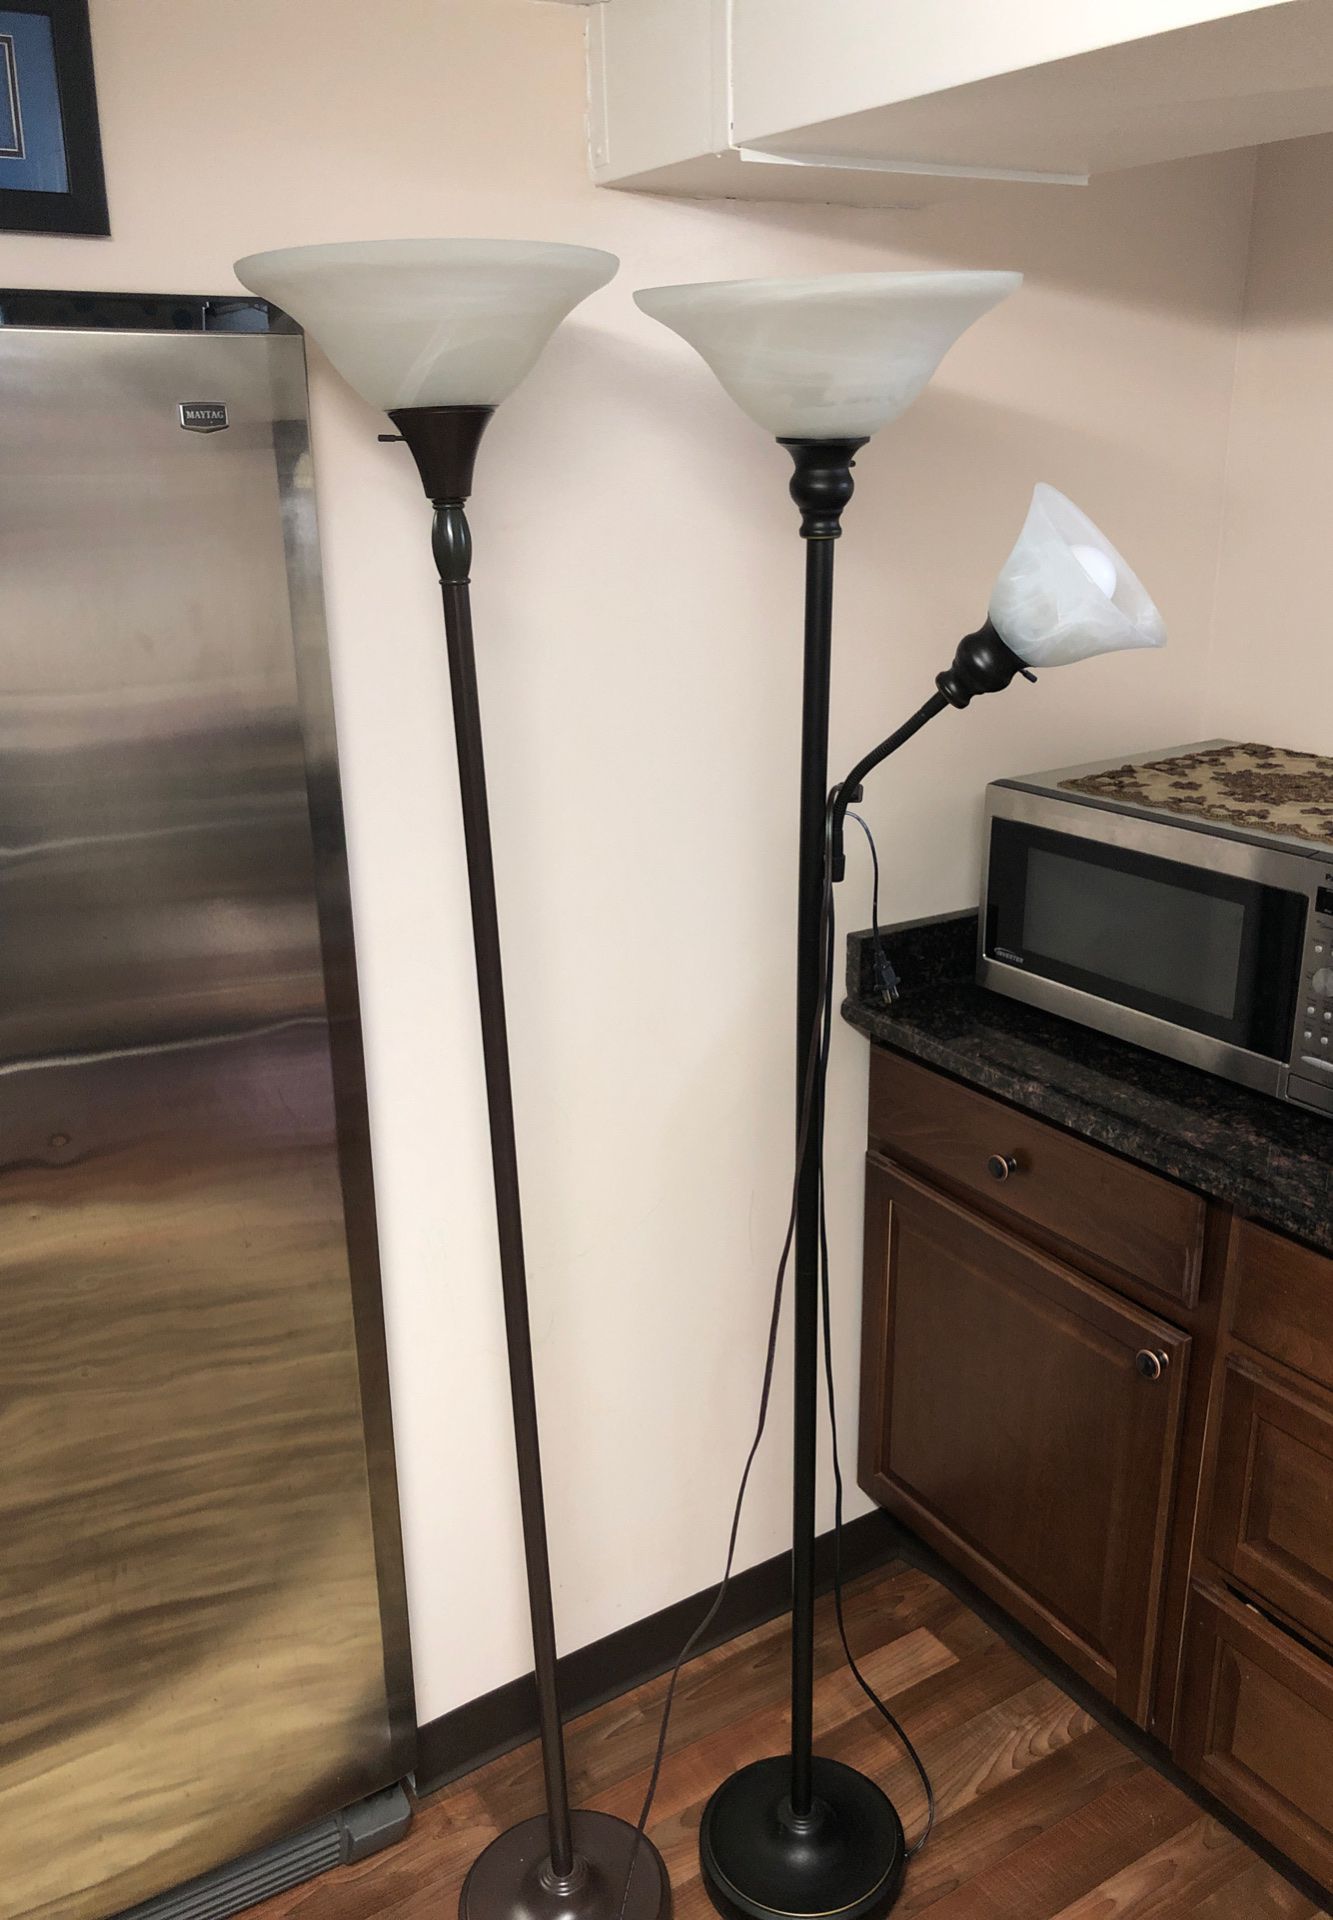 Brand new standing lamps